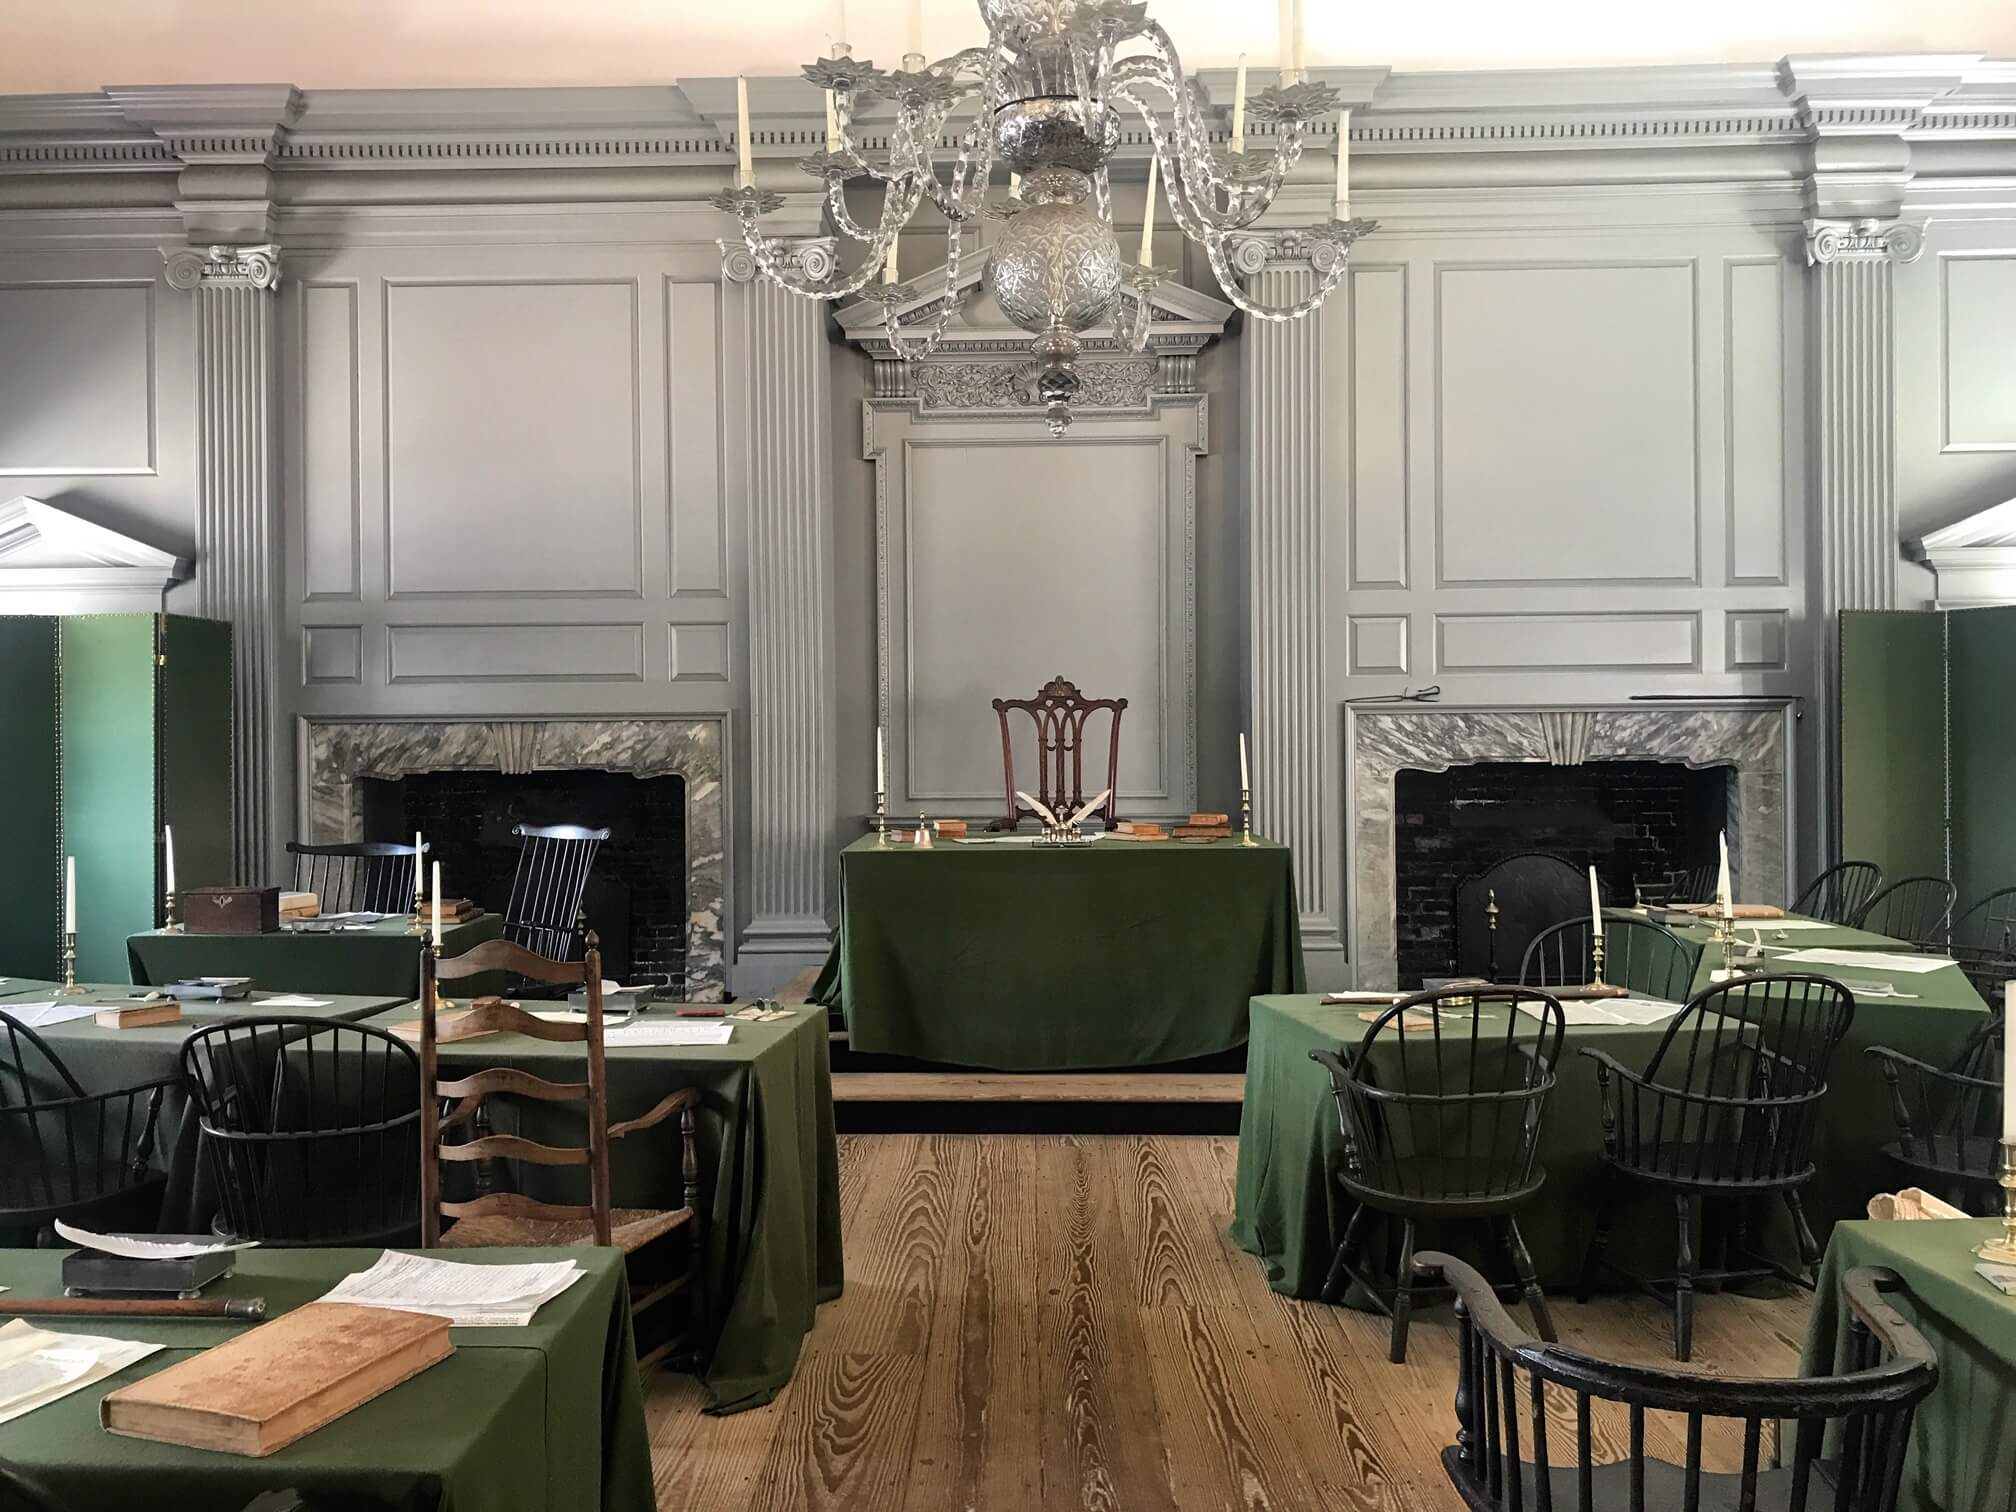 The room where the Declaration of Independence was signed.